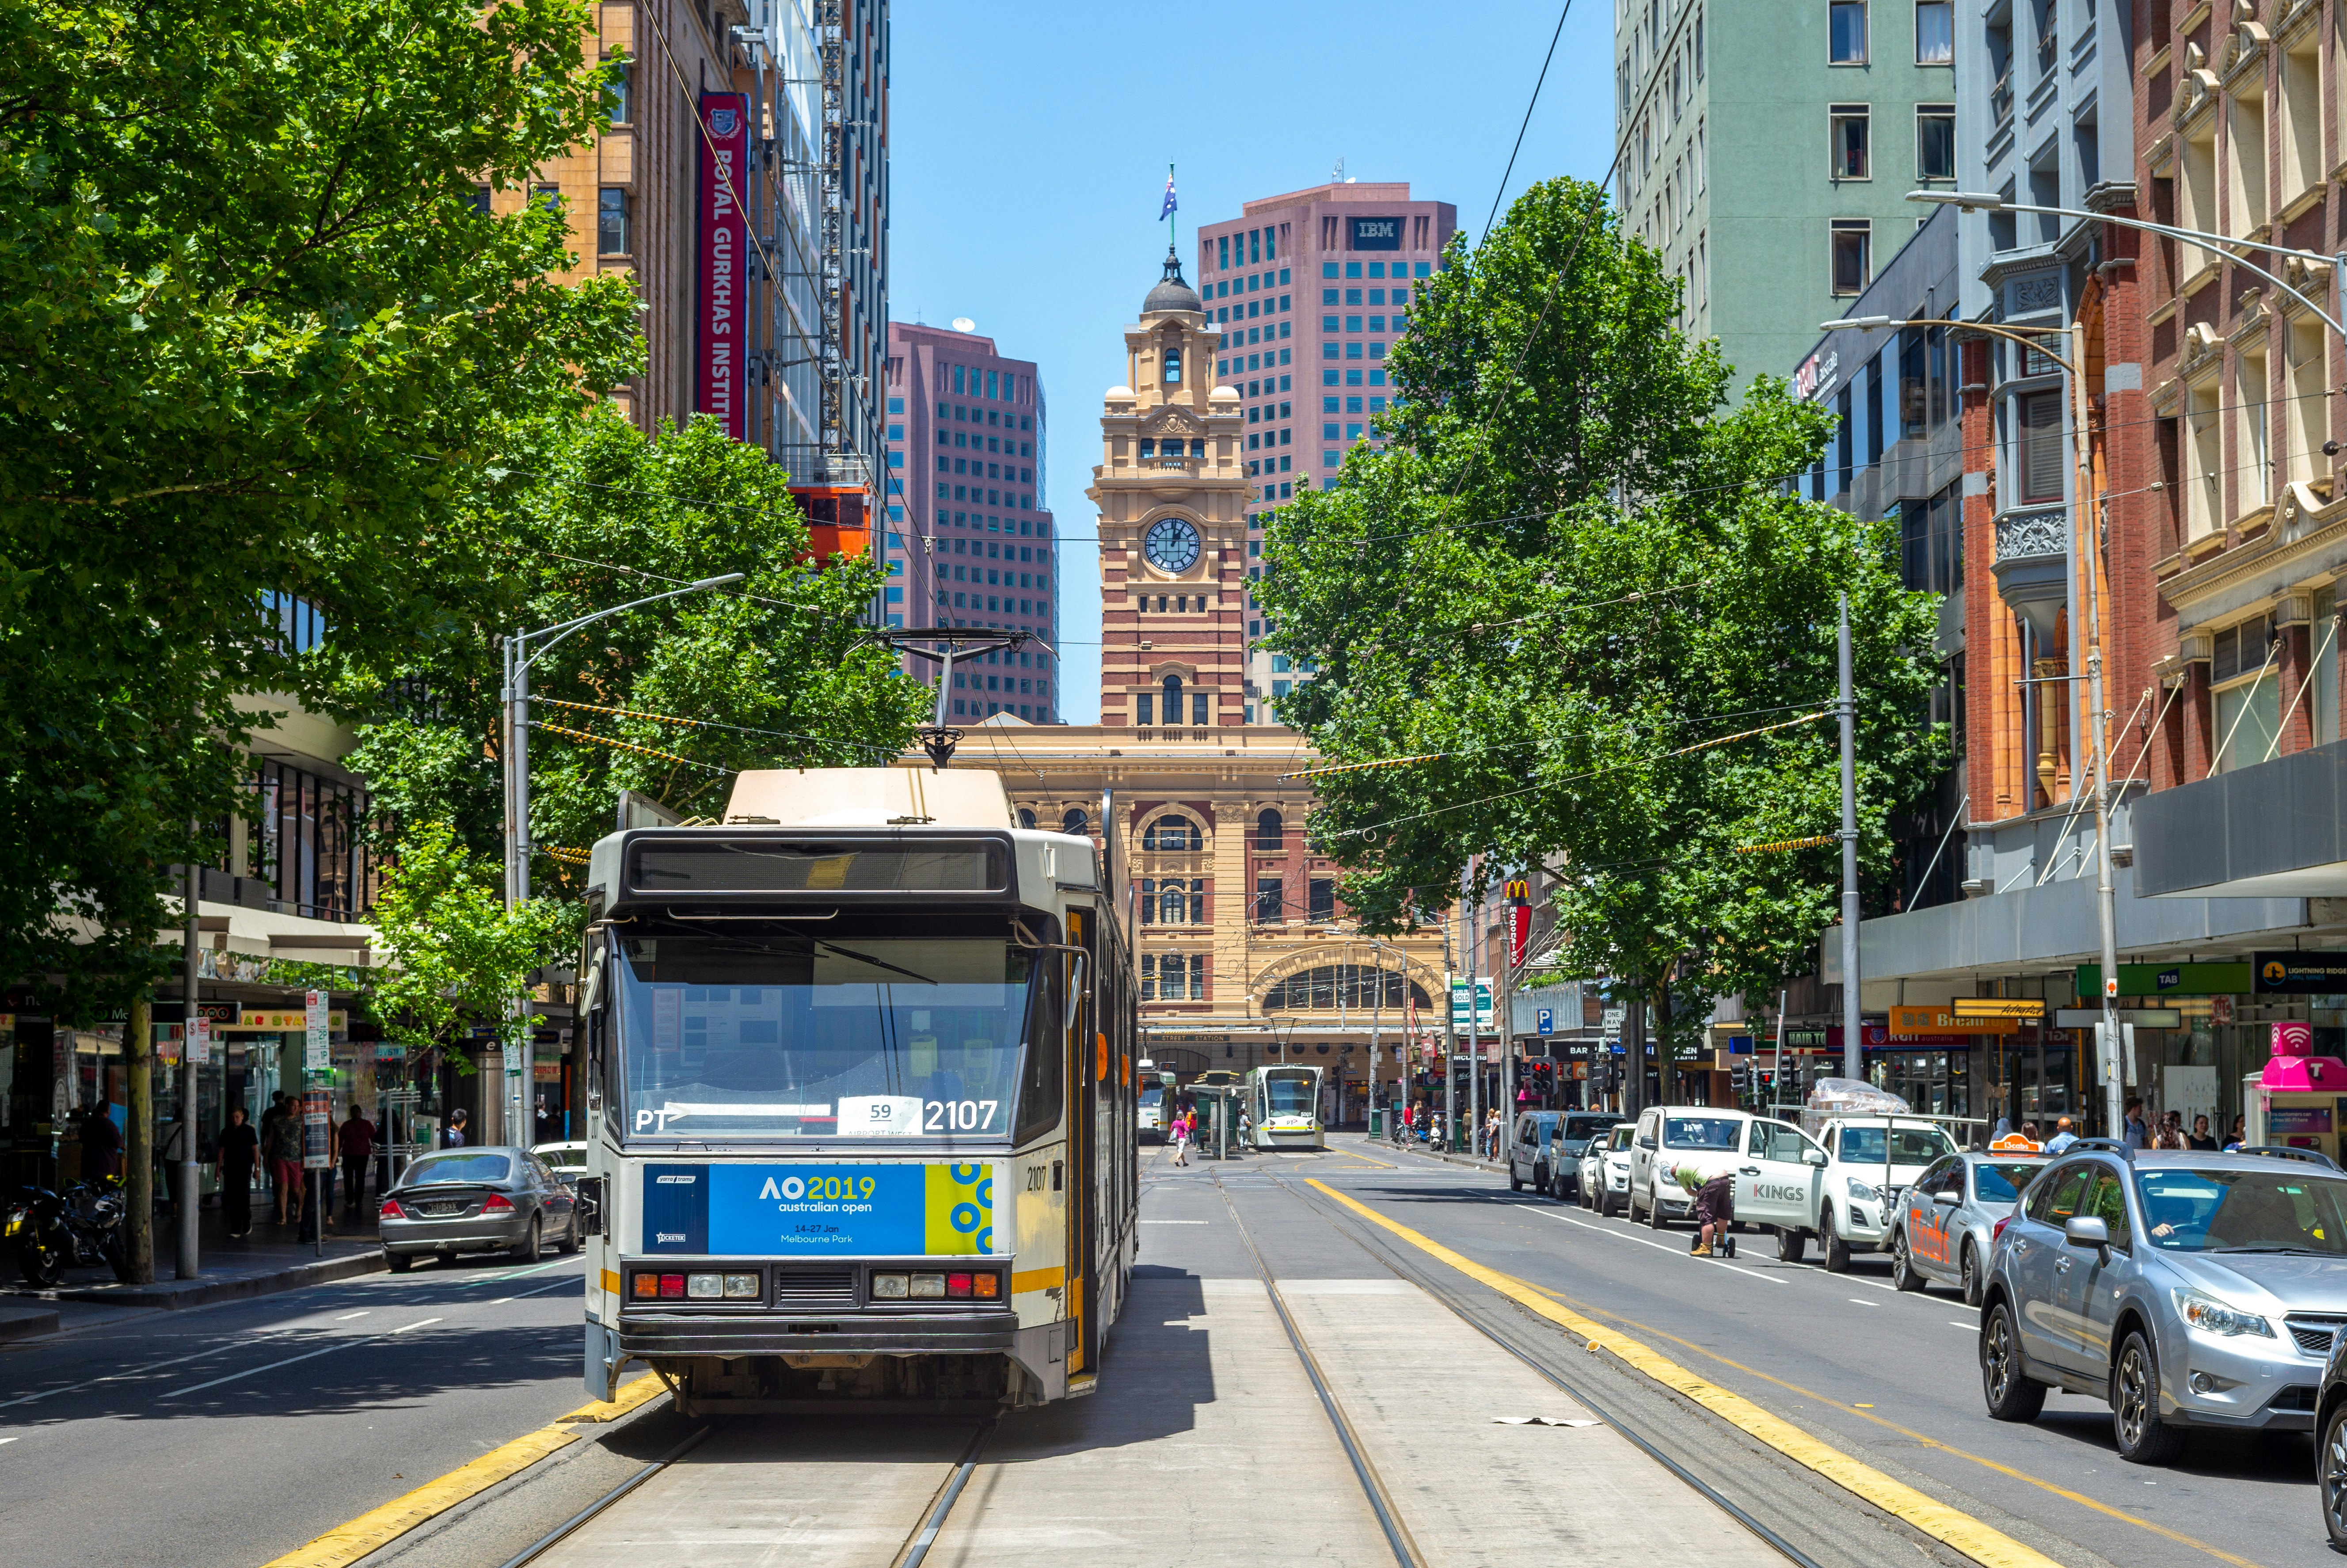 Melbourne street view with tram